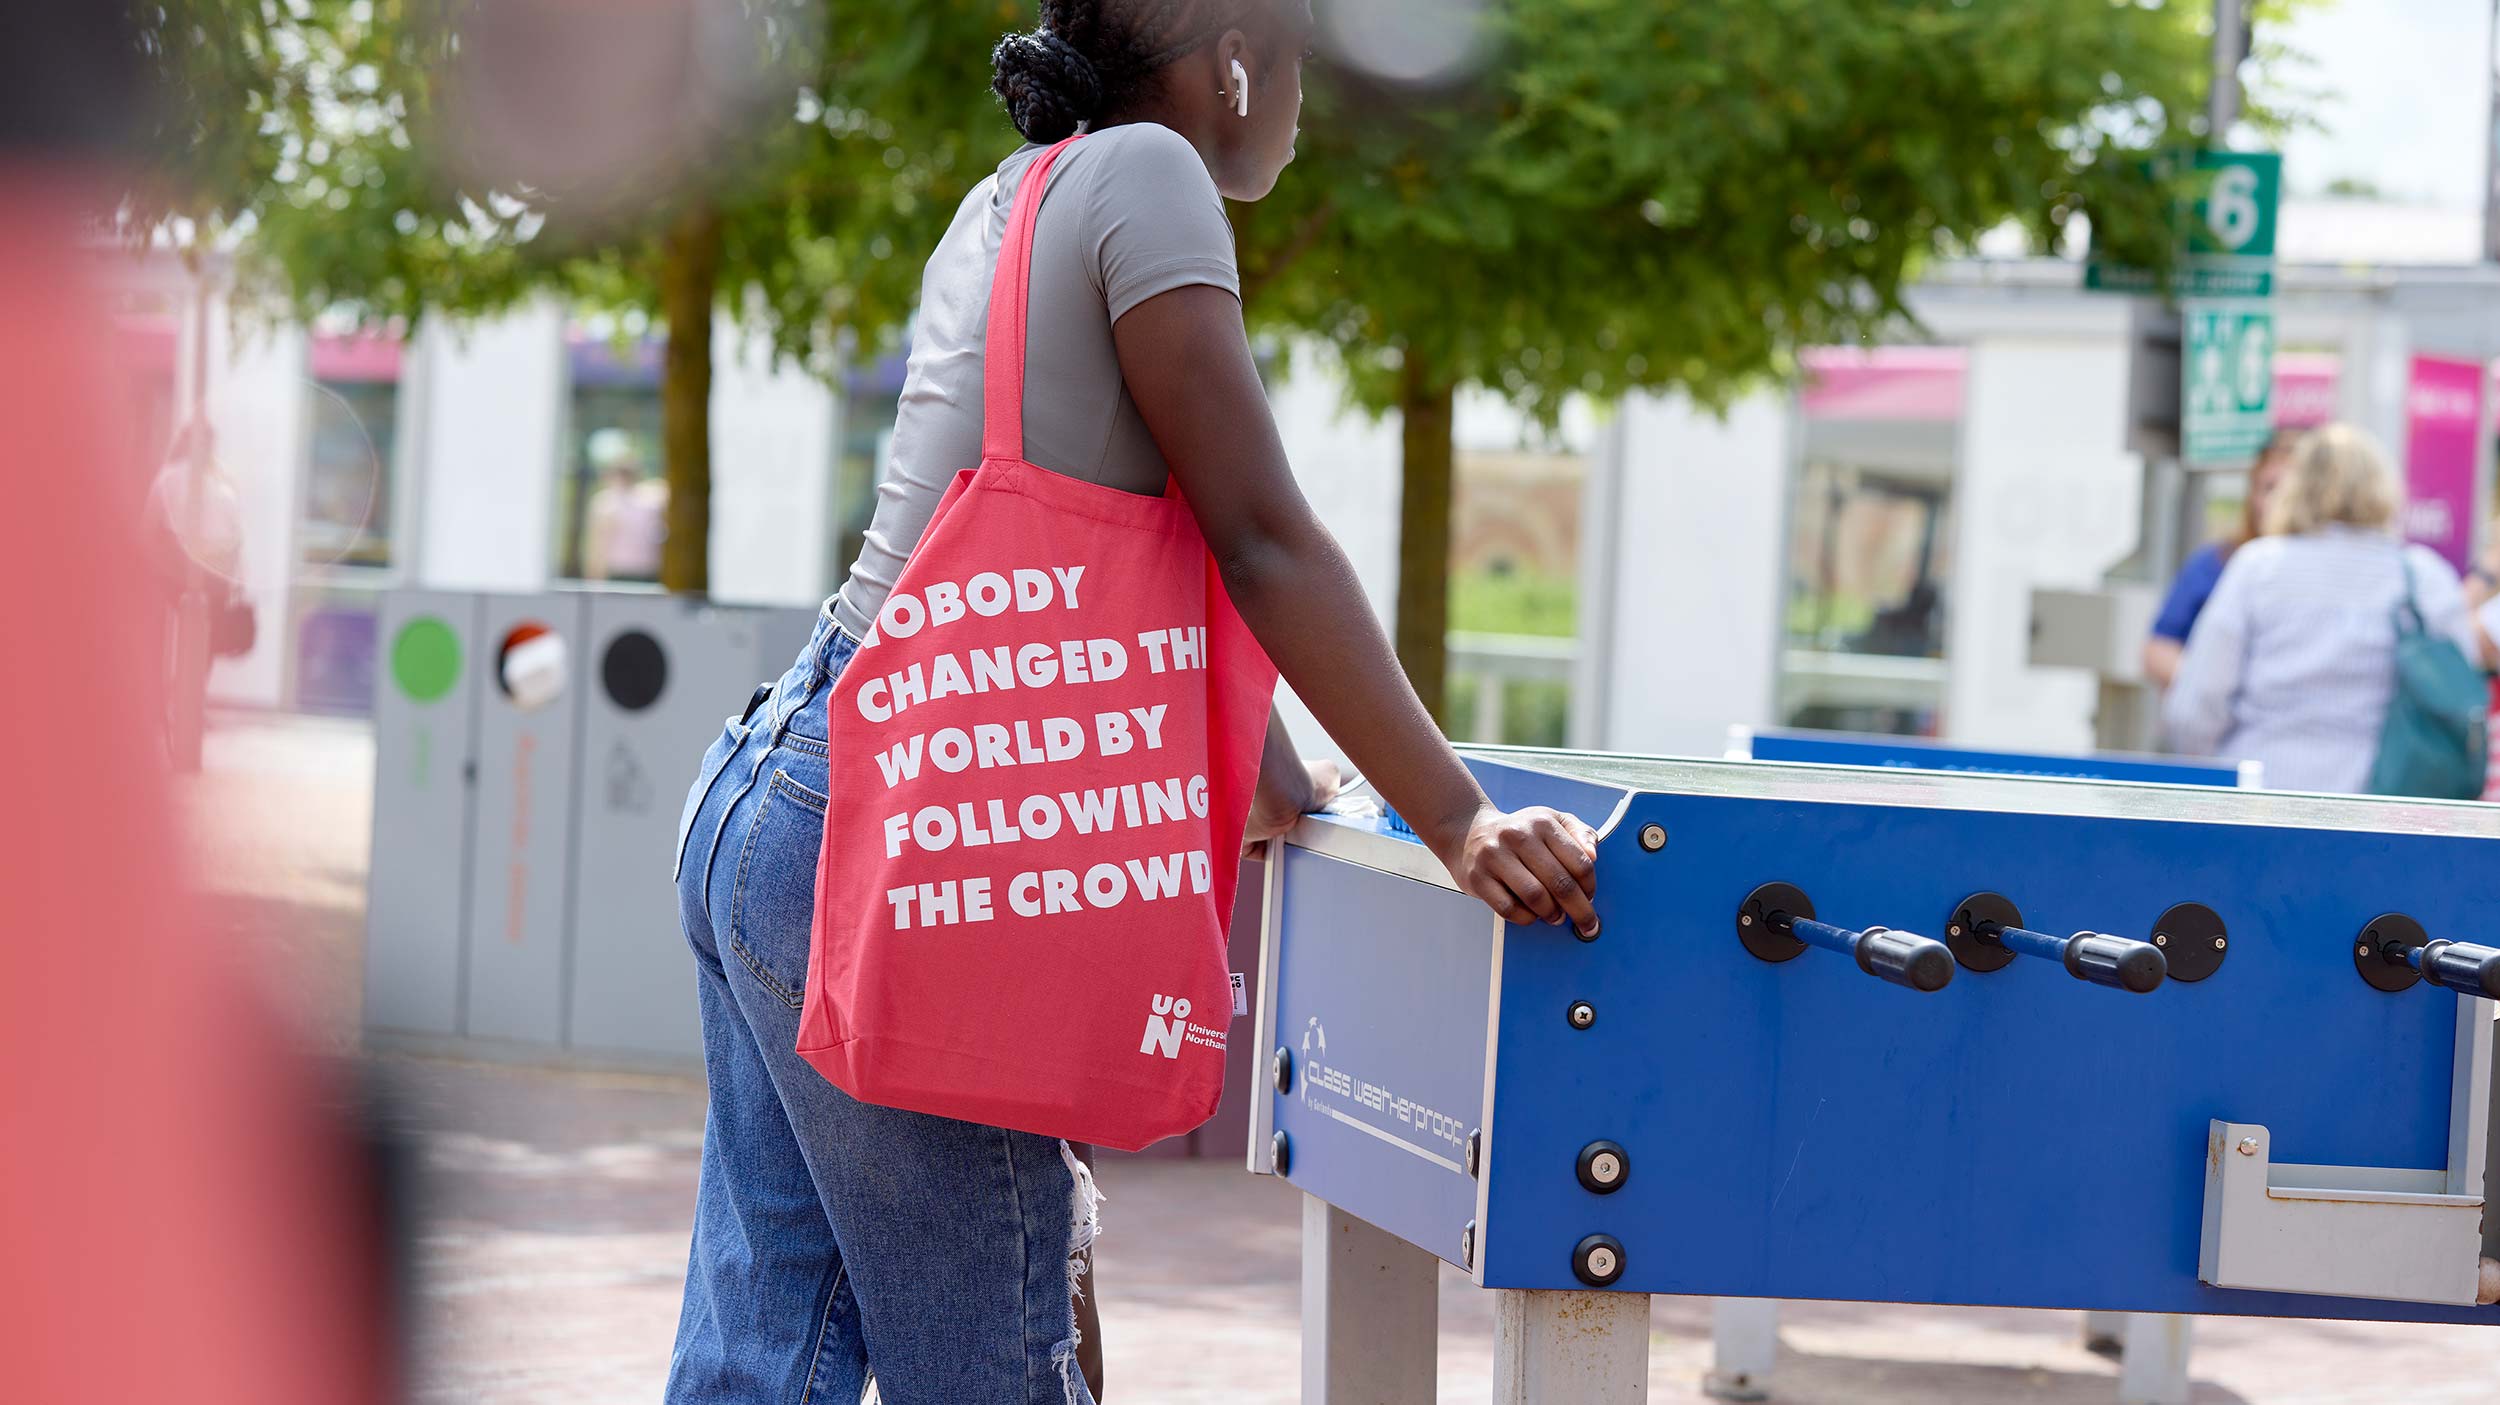 Student standing at a table football station outside. Their face is not in view, but their hands are on the table and they have a red tote bag from a University of Northampton event on their arms which reads 'nobody changed the world by following the crowd'.